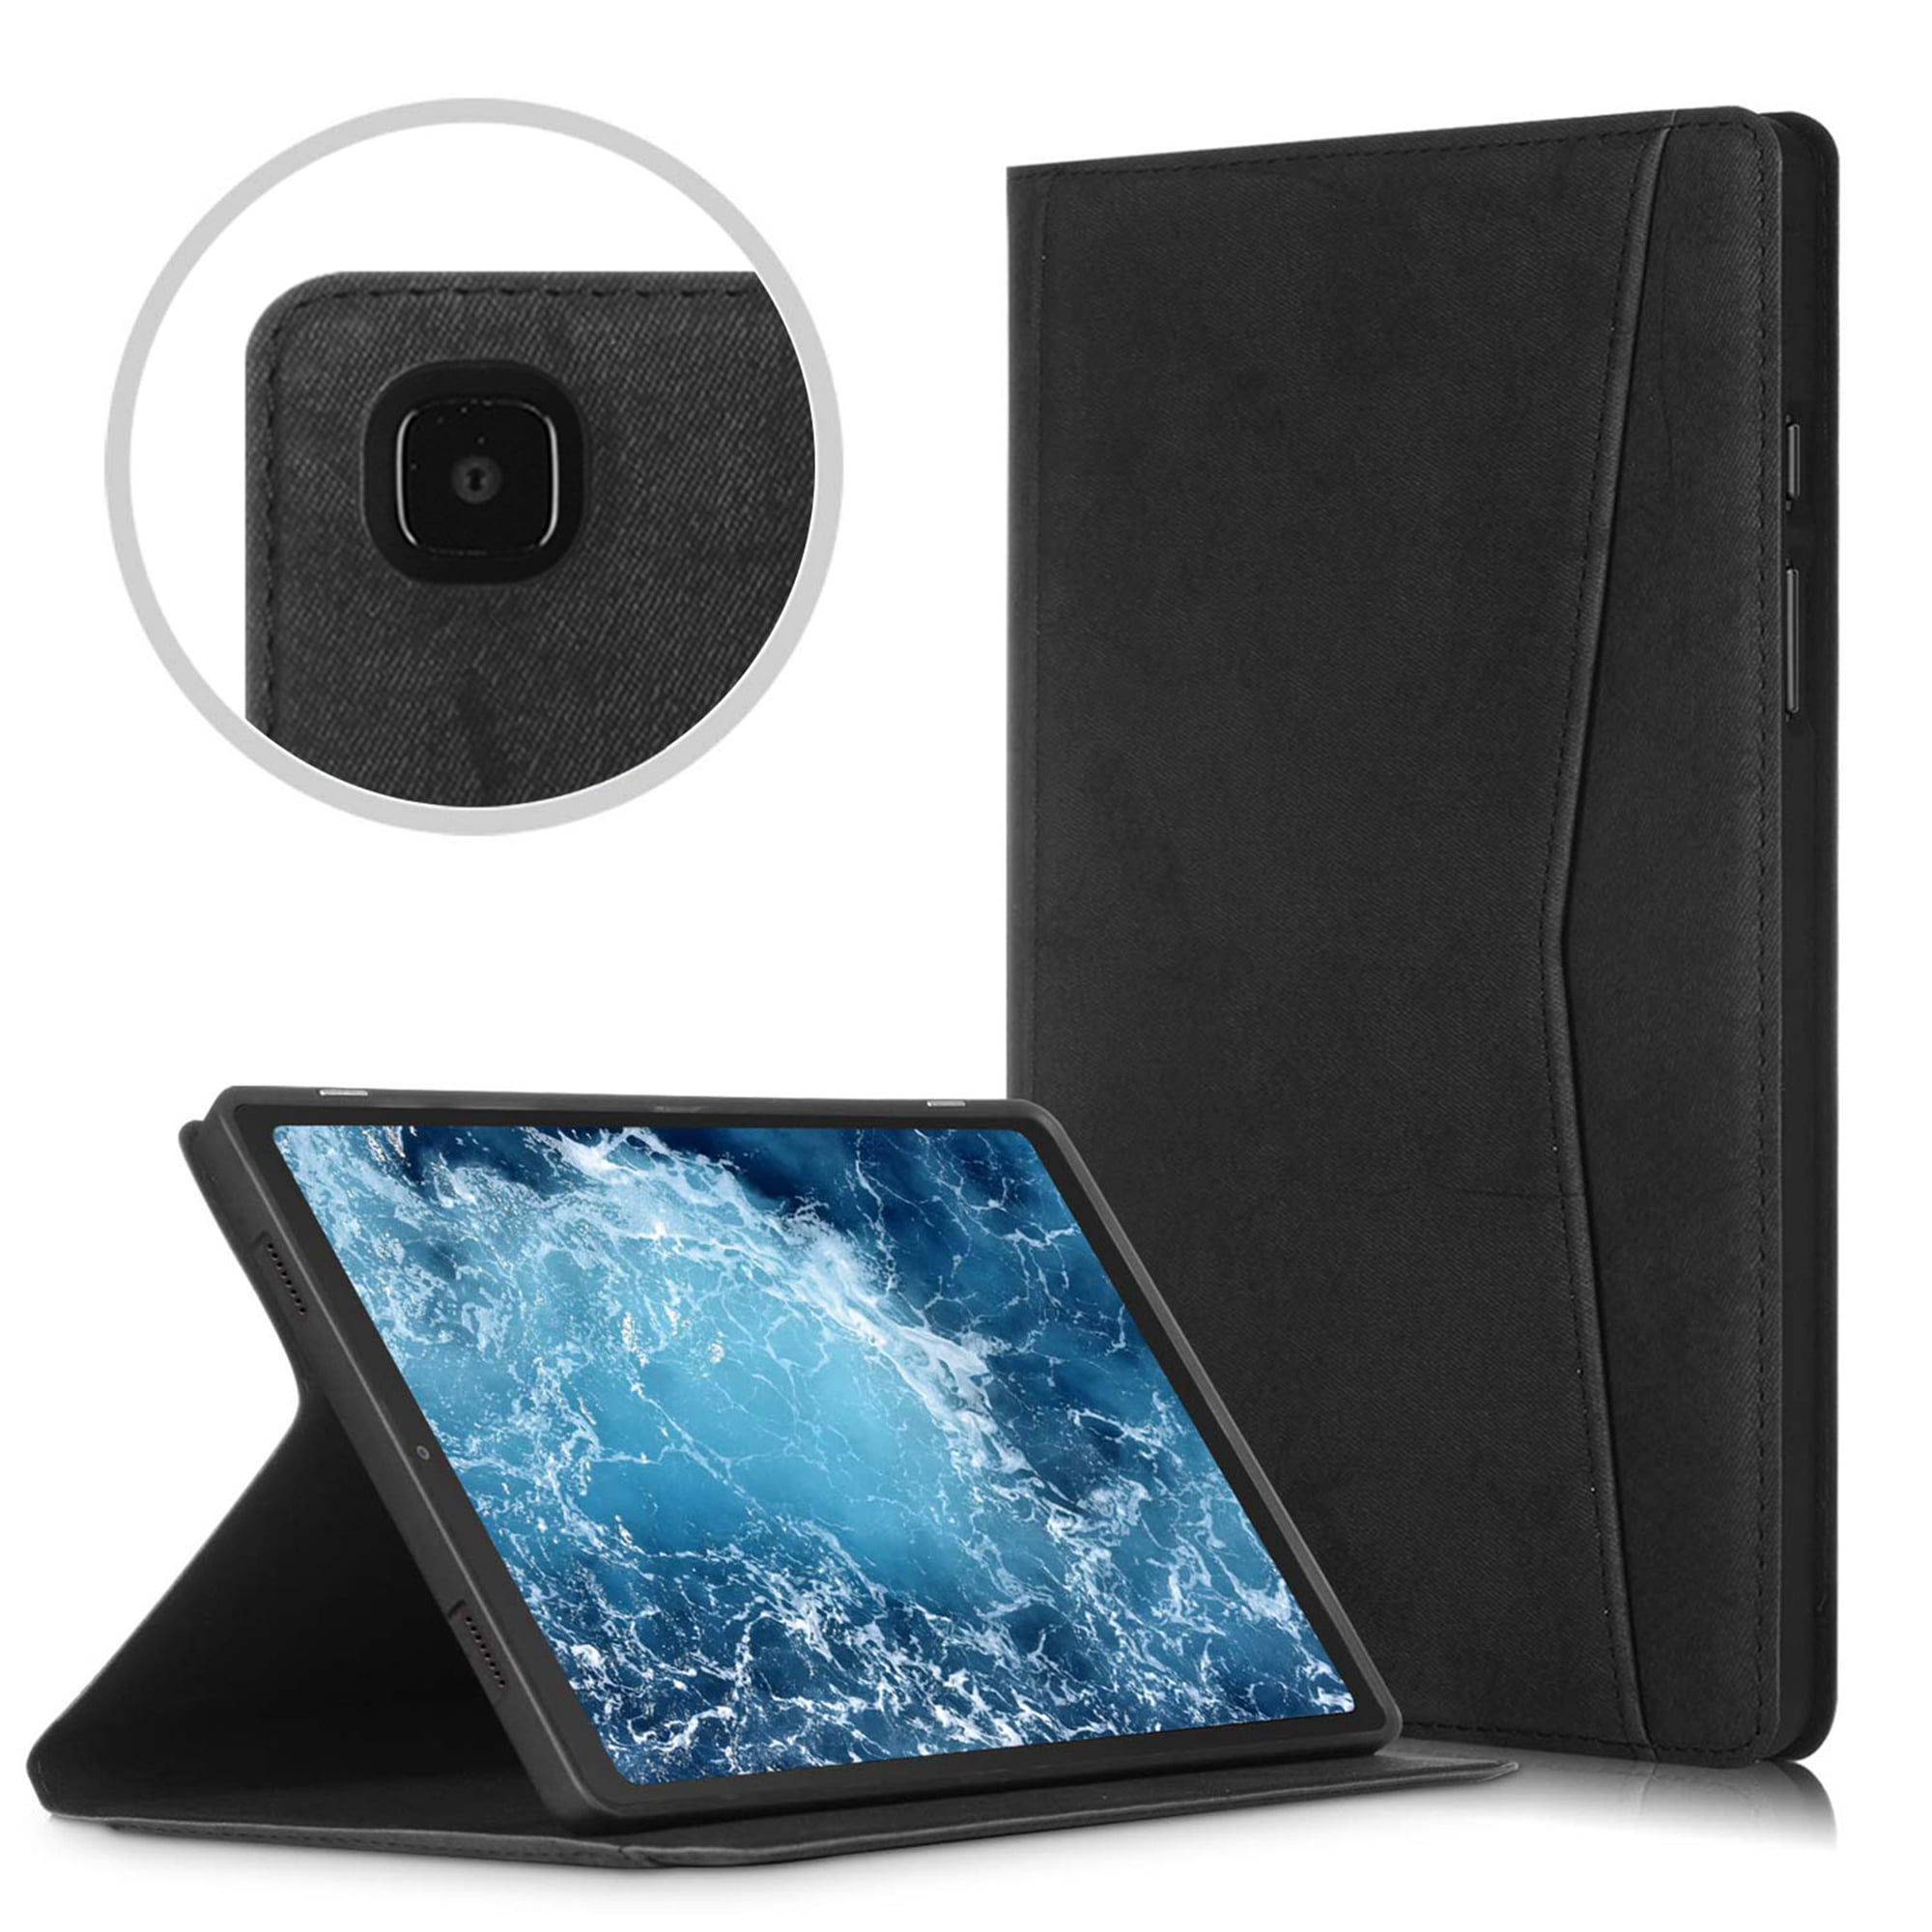 Case Cover for Samsung Galaxy Tab A7 10.4 Inch Tablet Wifi LTE 2020 SM-T505 SM-T500 SM-T50 Acelive Tab A7 Case